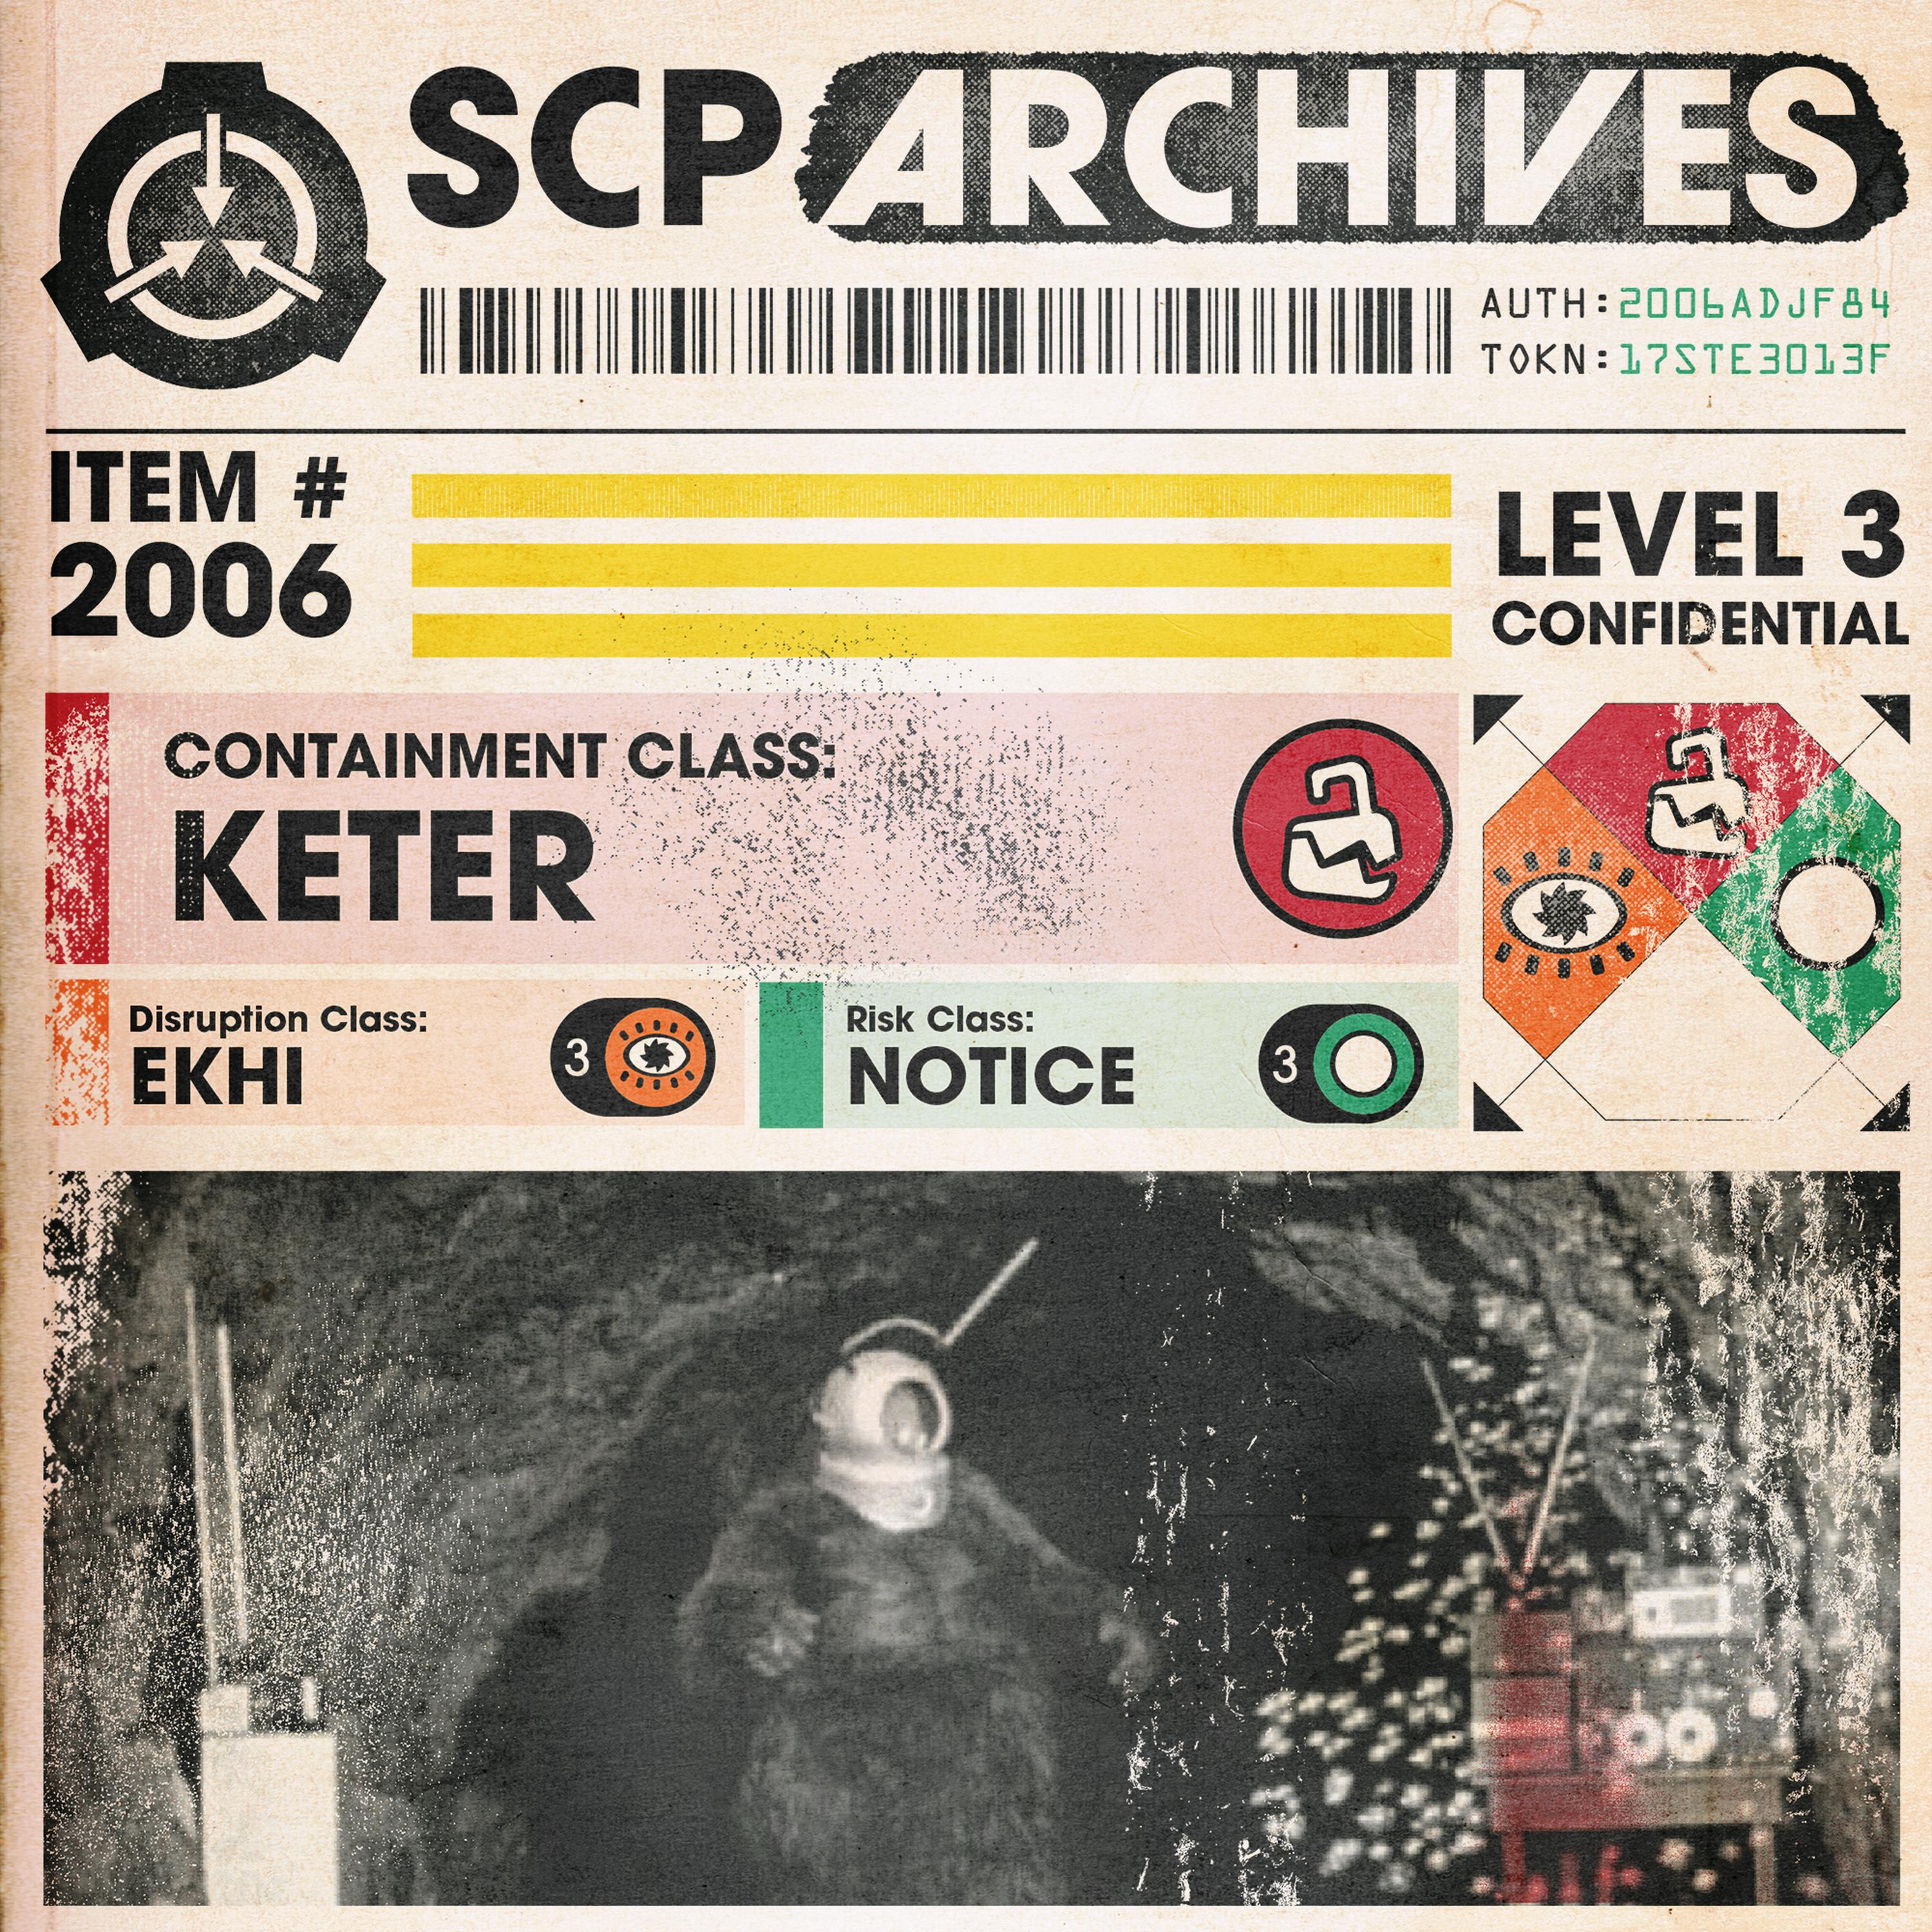 SCP-2006: ”Too Spooky”